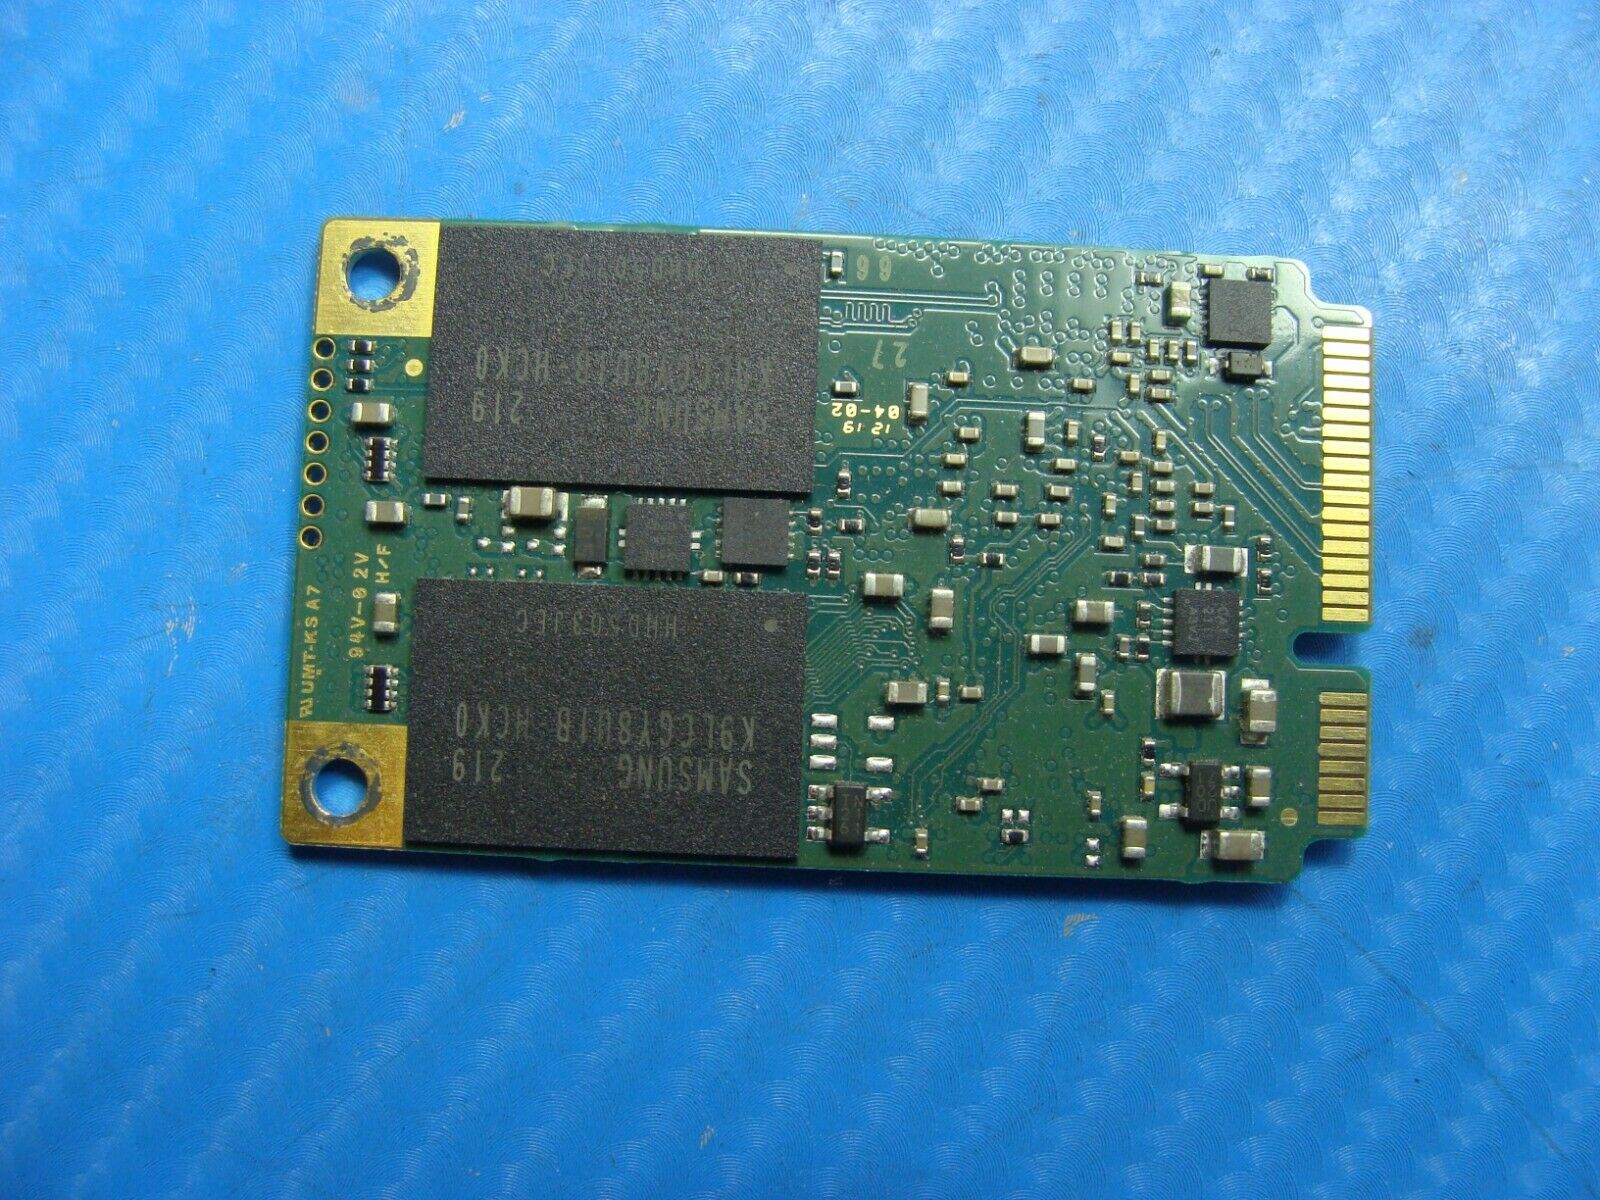 Dell 8500 Samsung 32GB SATA SSD Solid State Drive mzmpc032hbcd-000d1 - Laptop Parts - Buy Authentic Computer Parts - Top Seller Ebay